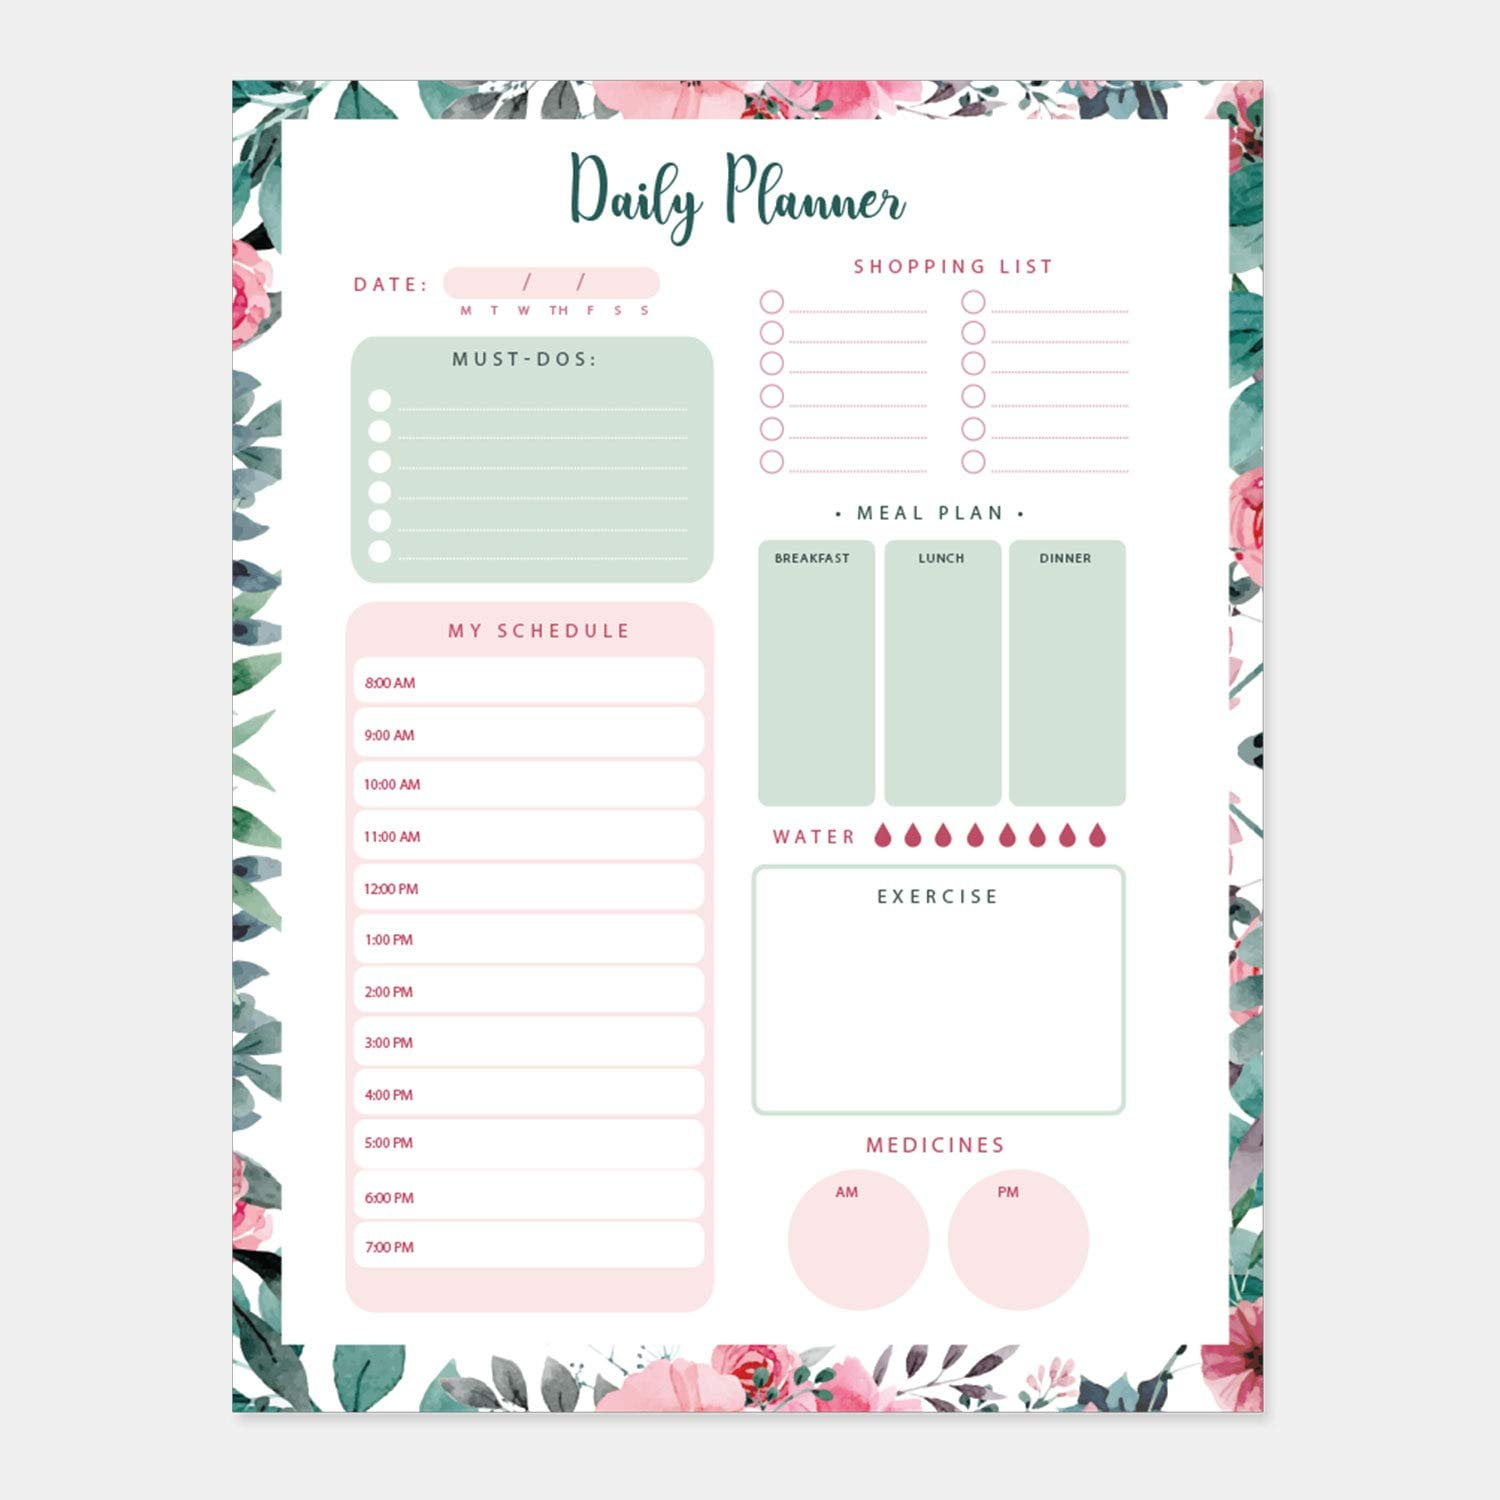 daily-planner-50-sheets-of-8-5x11-inches-undated-checklist-organizer